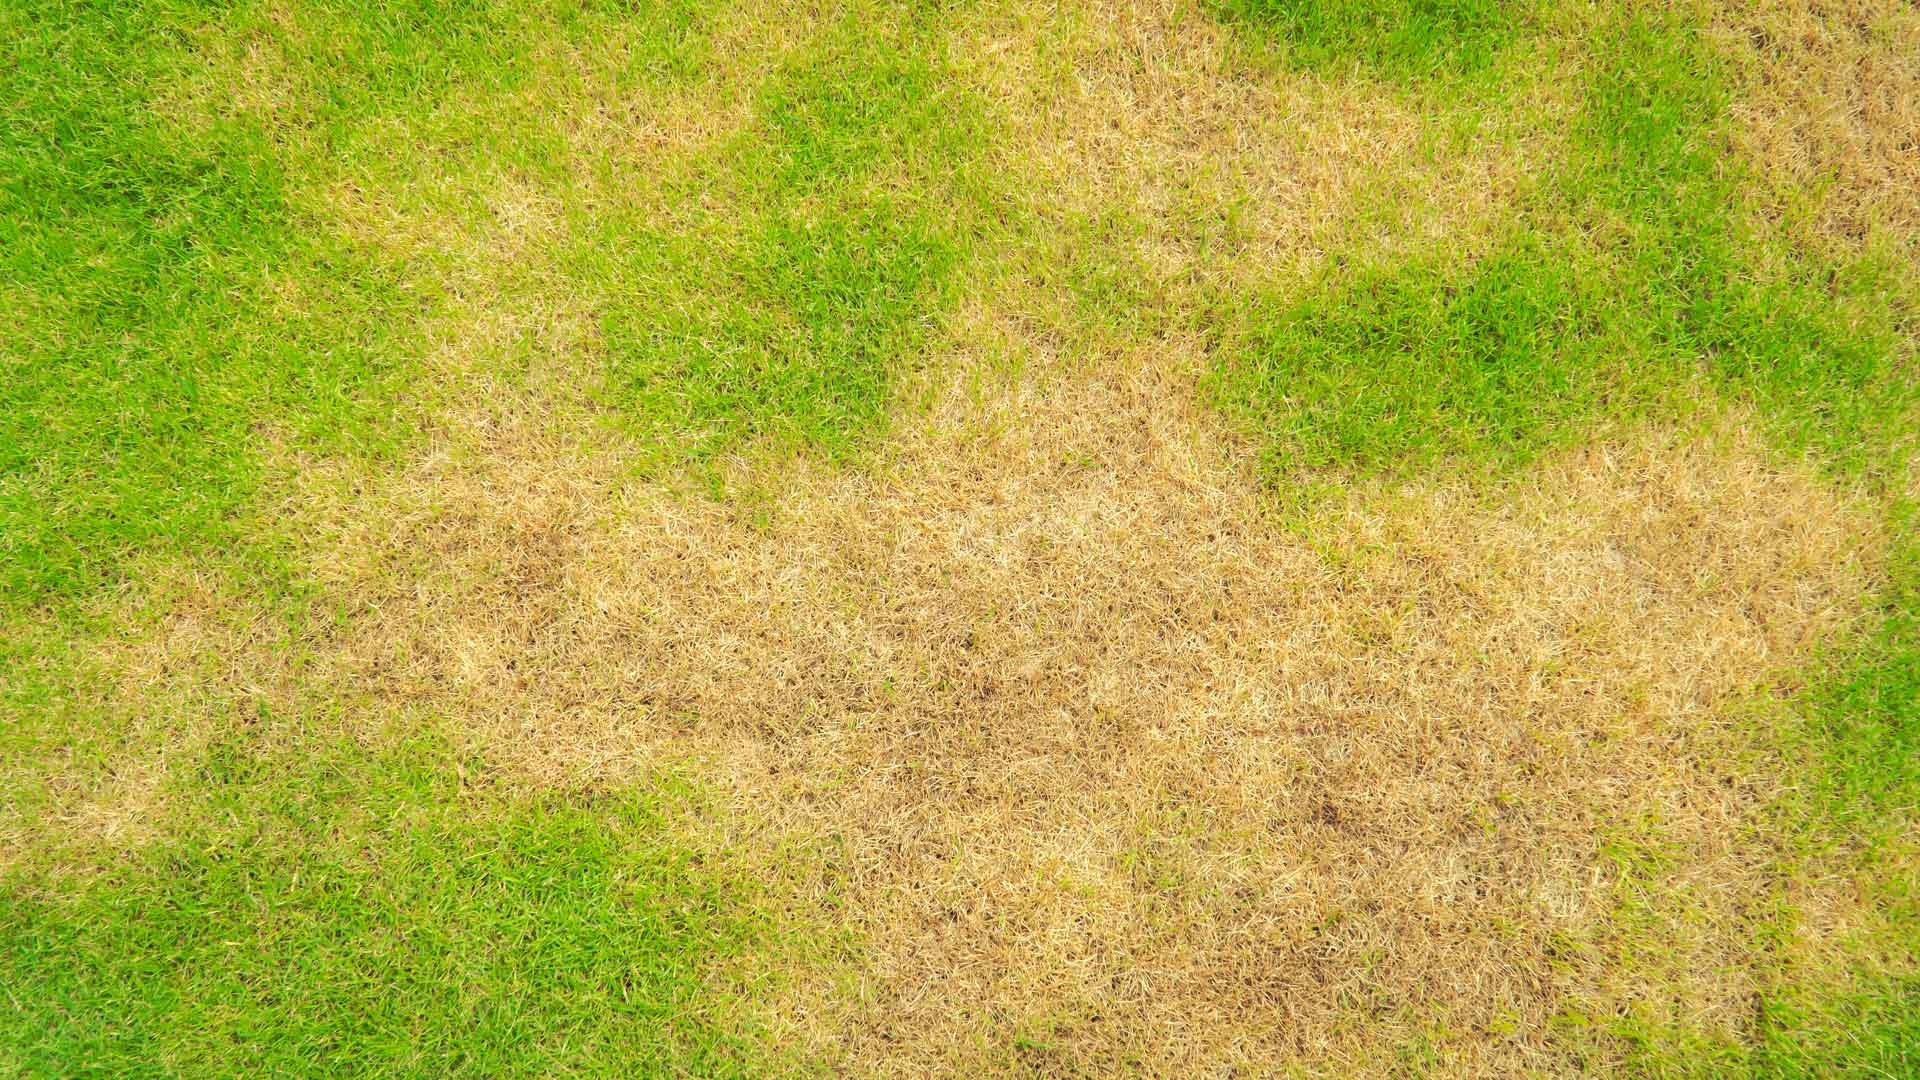 Brown patches in a disease lawn in Argyle, TX.